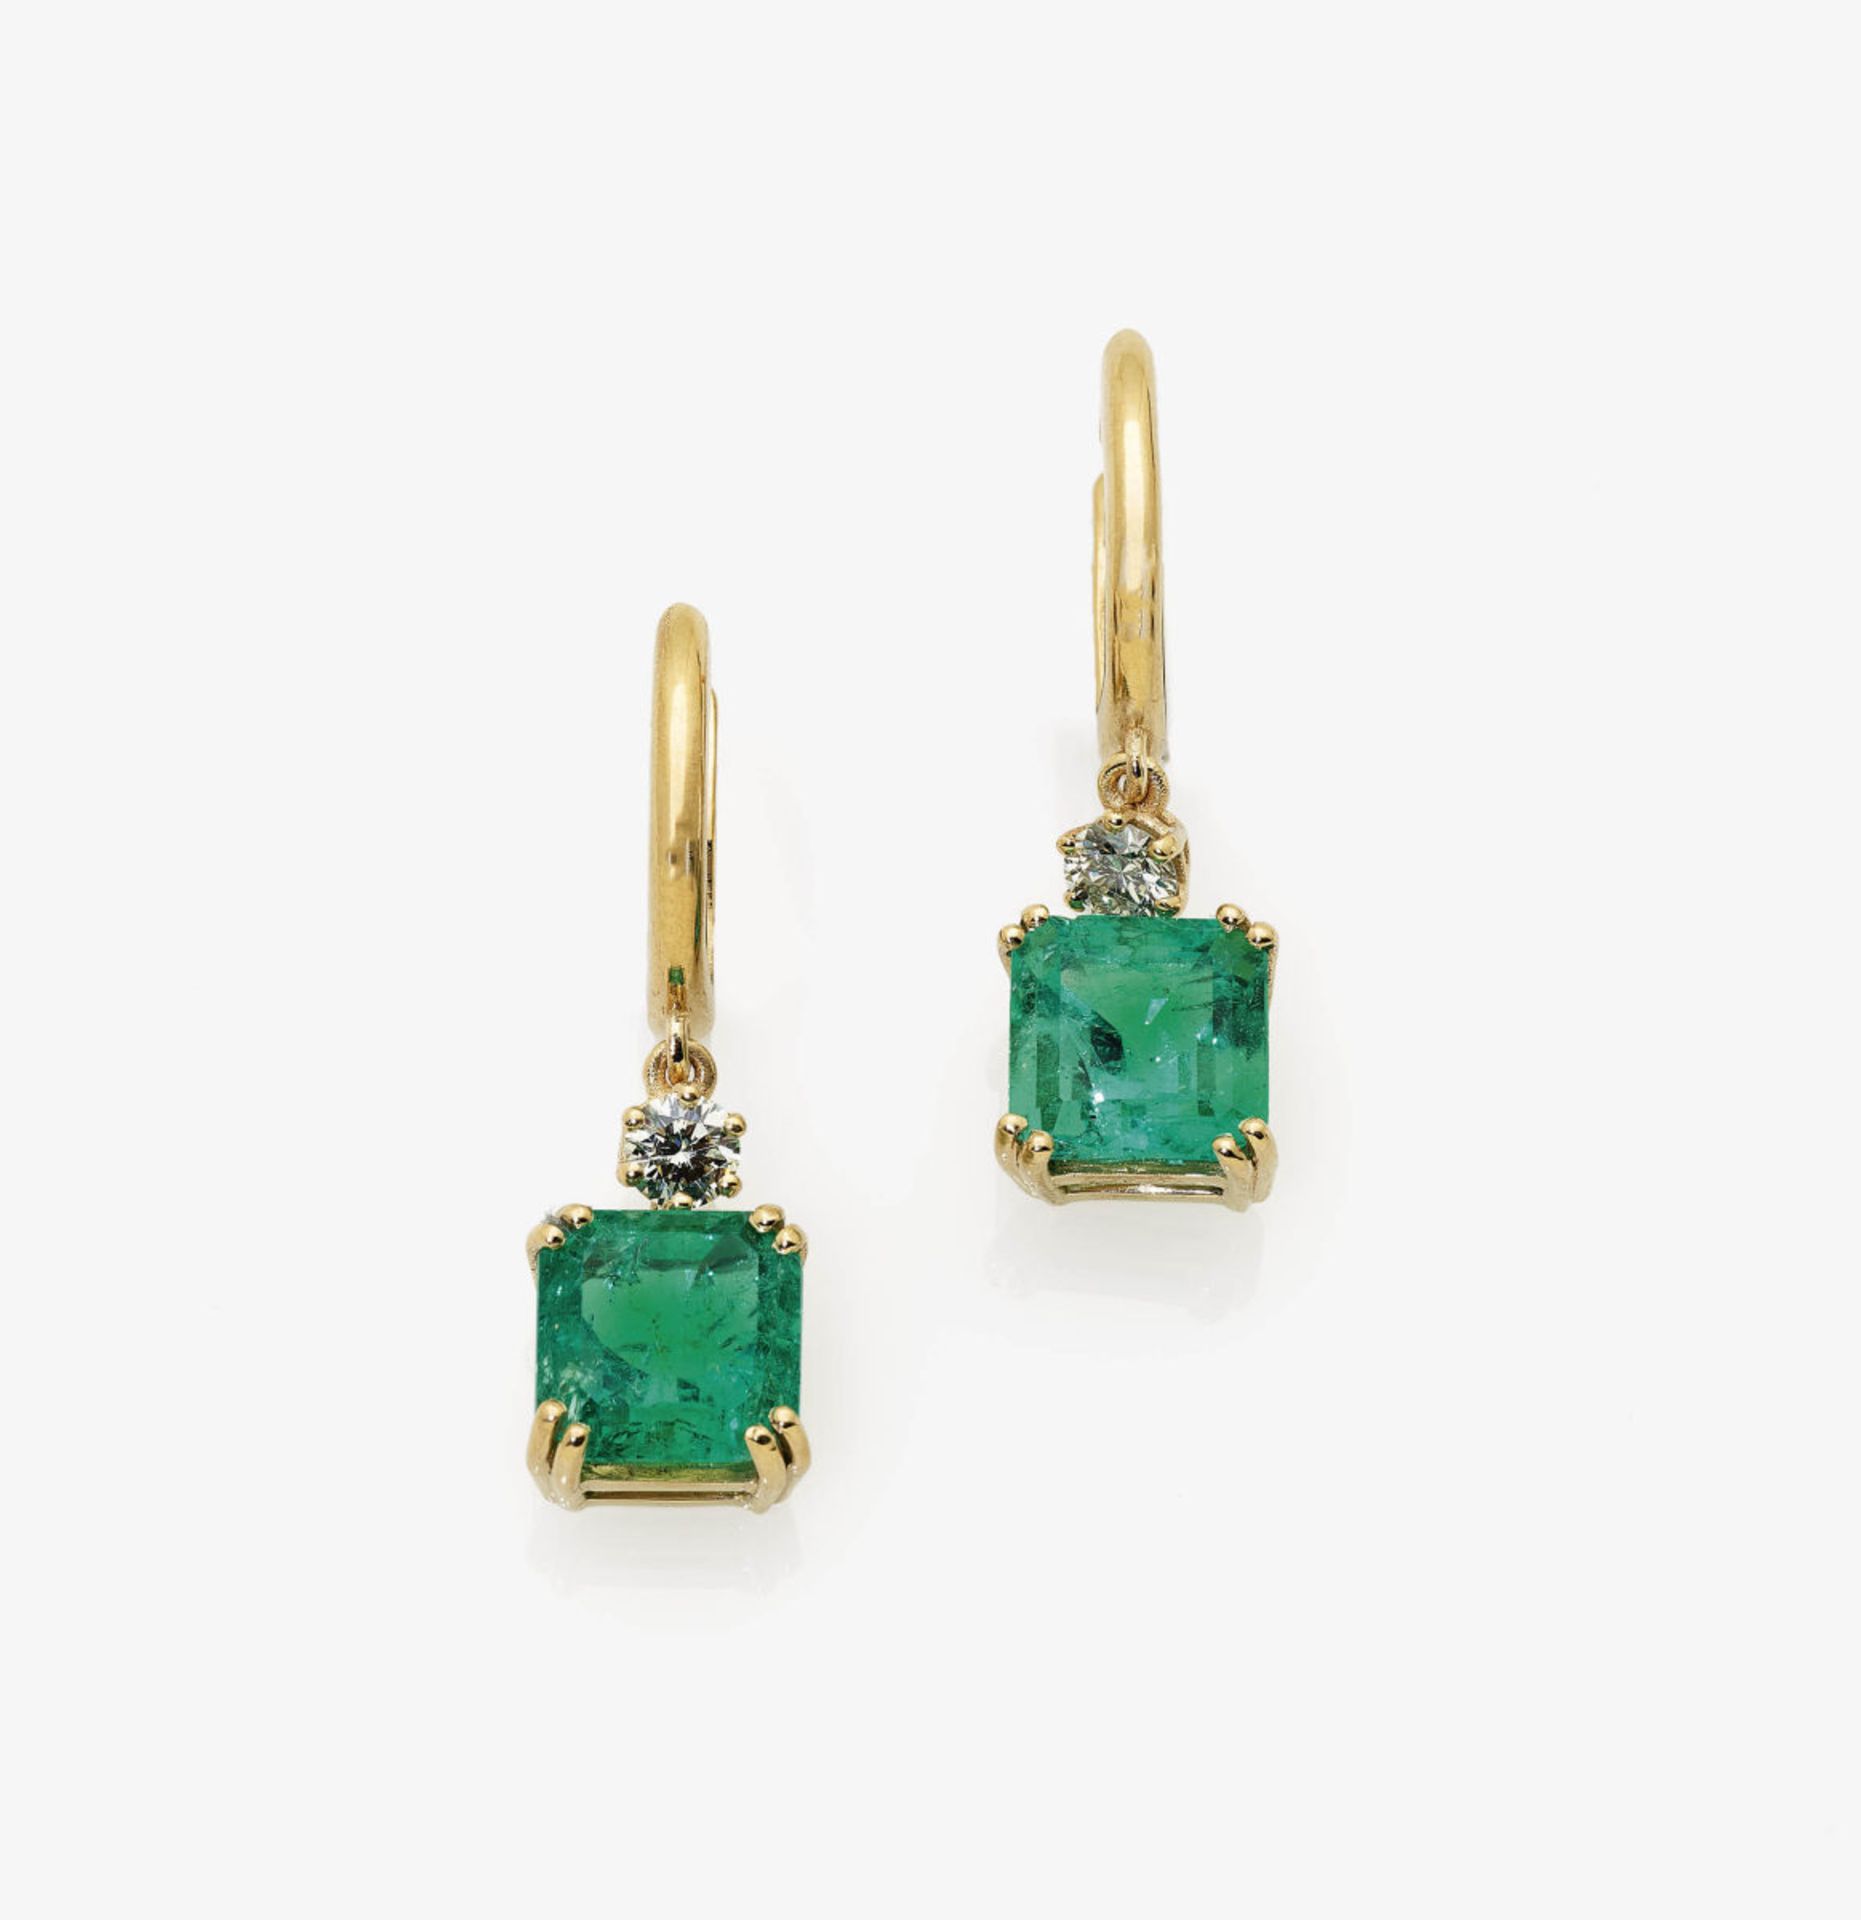 A Pair of Colombian-Emerald and Diamond Earrings